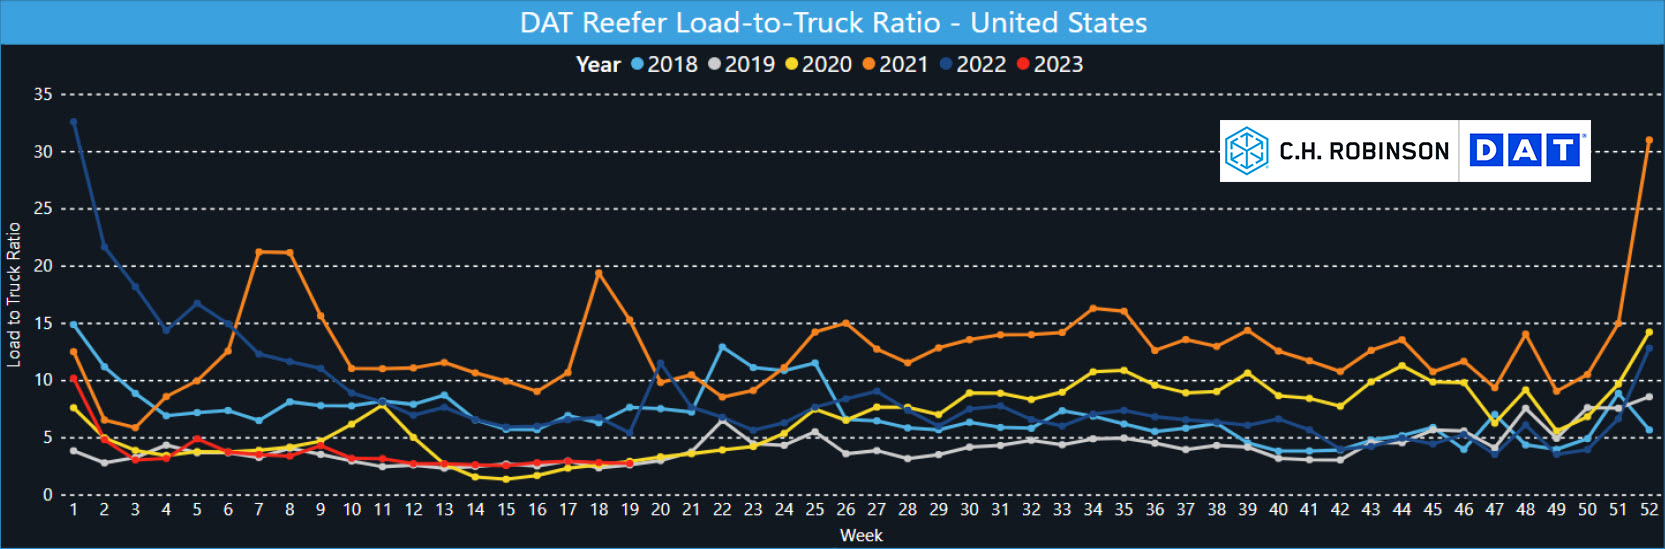 refrigerated load to truck 5 year comparison 